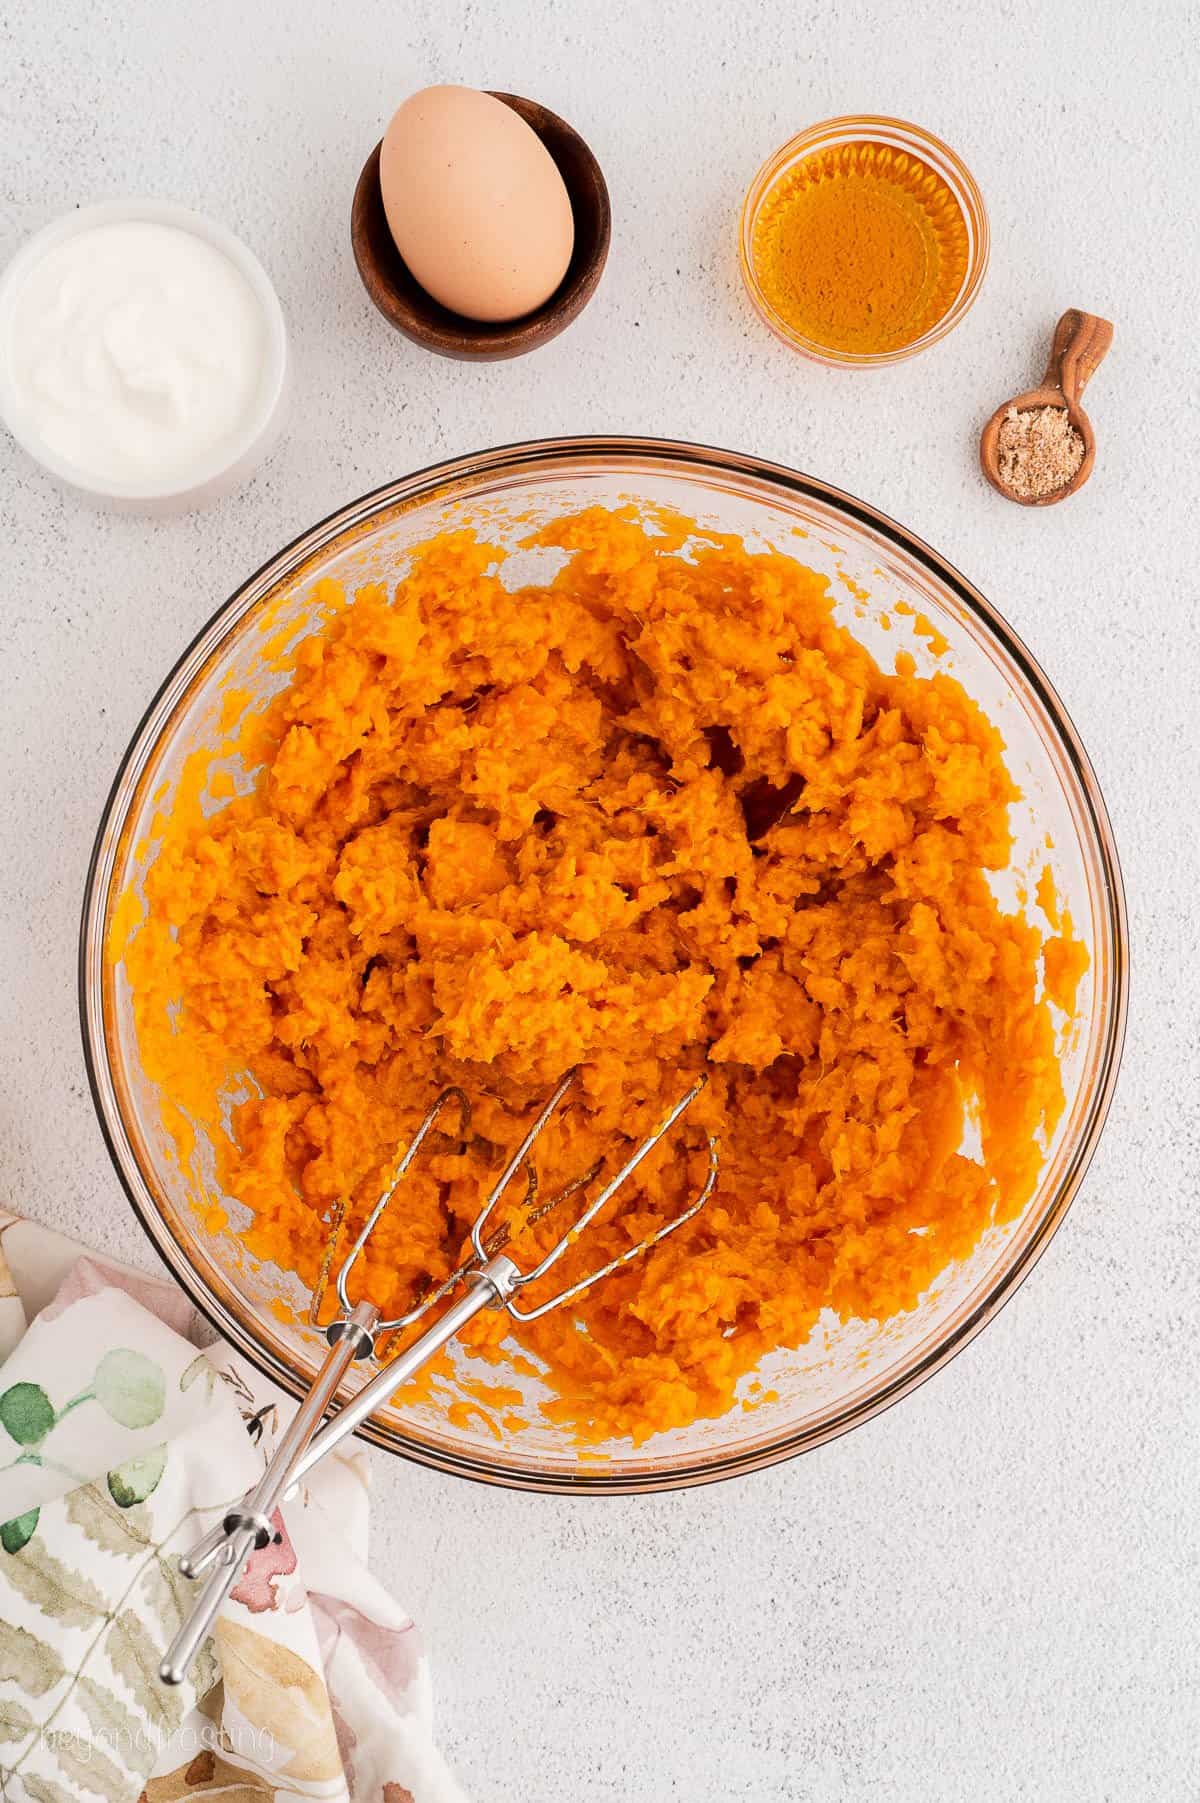 Cooked and mashed sweet potatoes in a bowl.